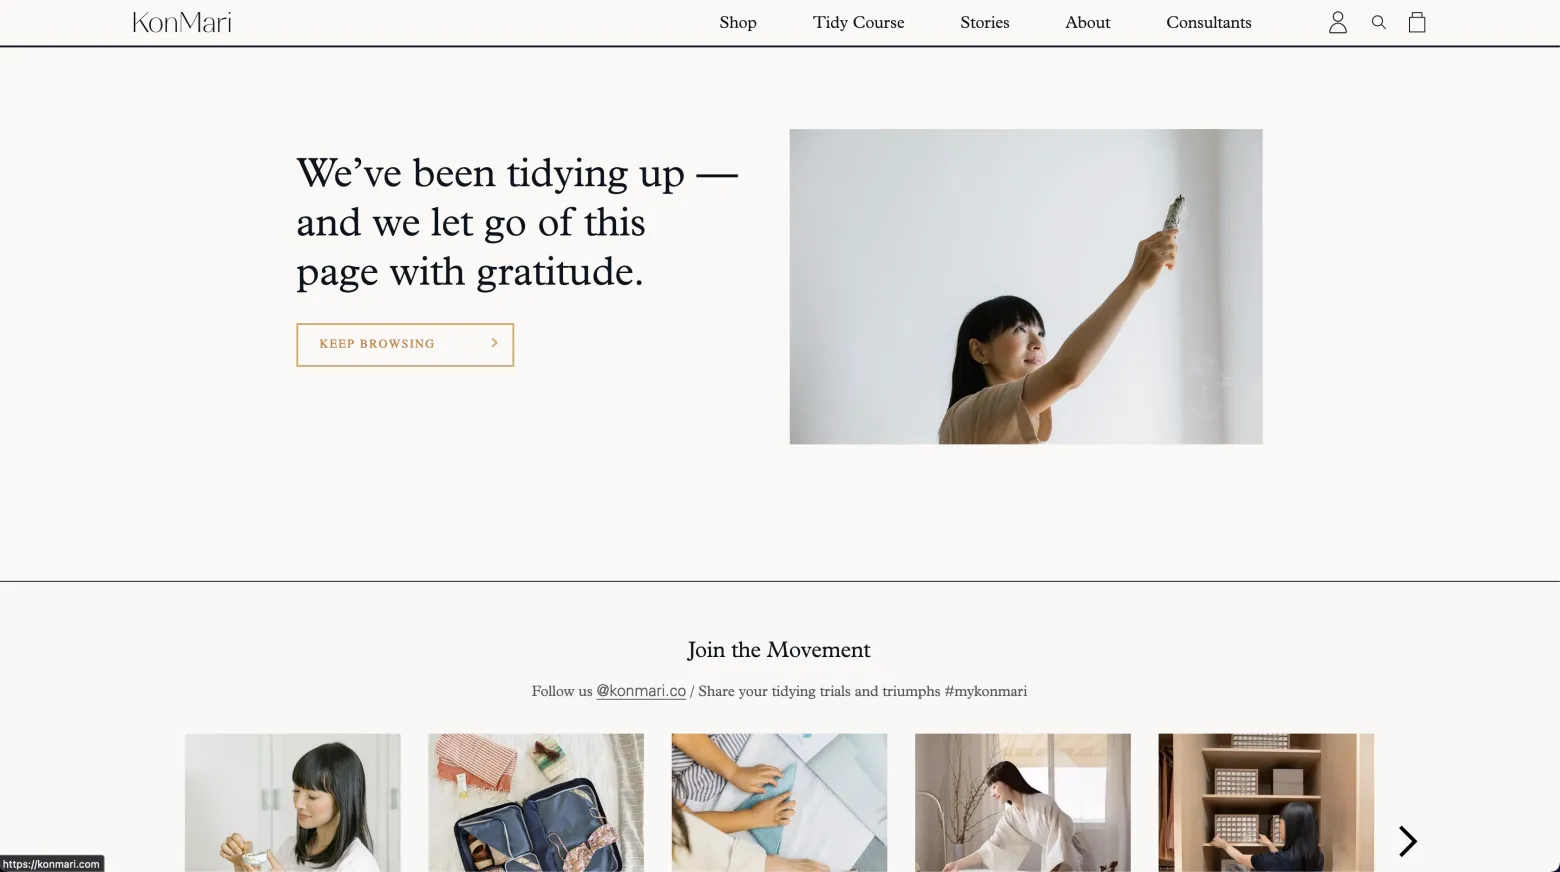 Konmari: We've been tidying up - and we let go of this page with gratitude.